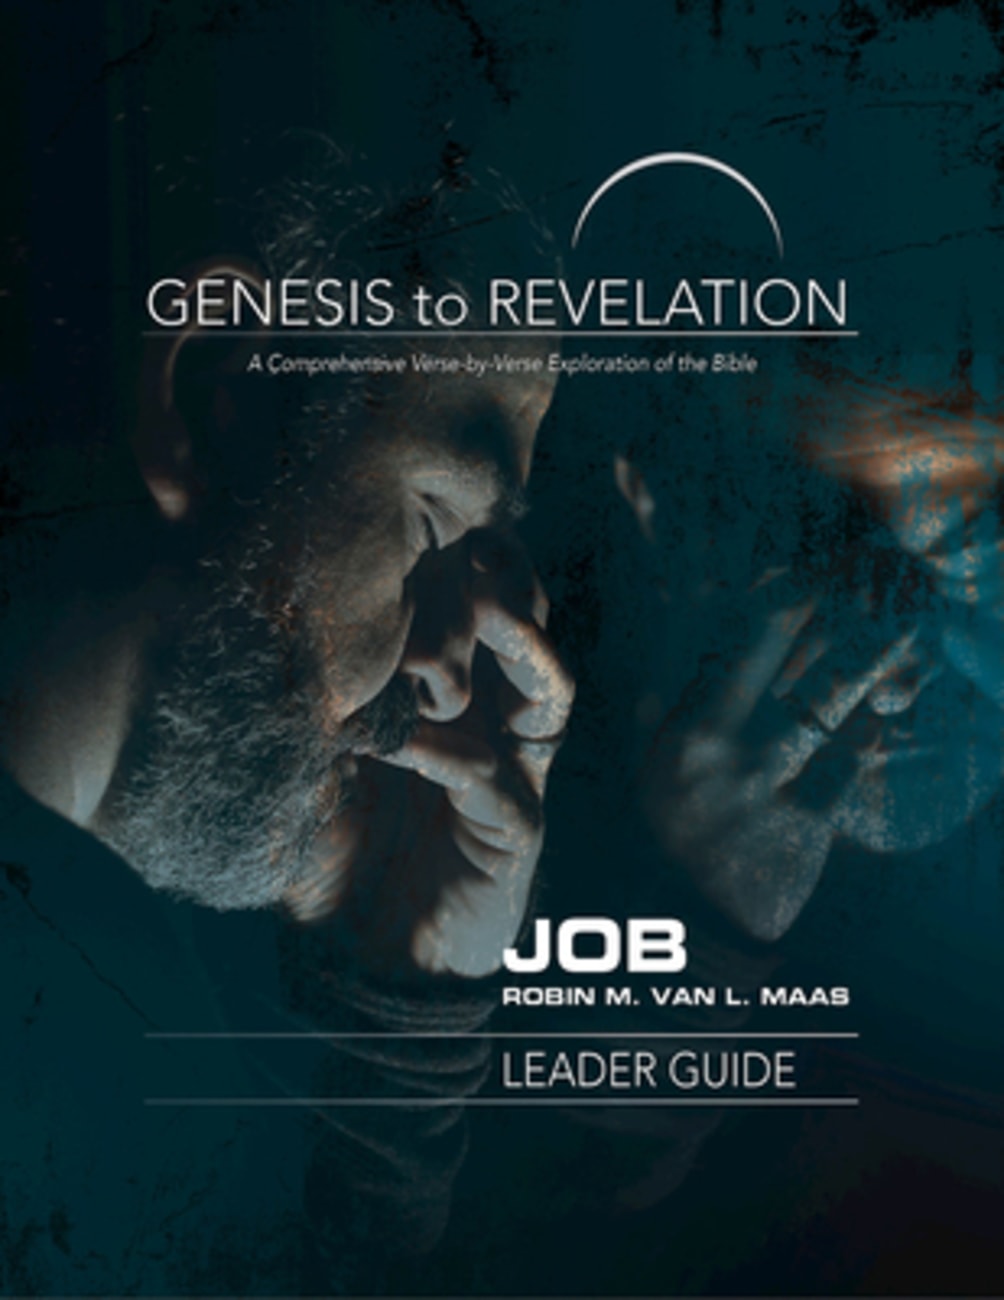 Job : A Comprehensive Verse-By-Verse Exploration of the Bible (Leader Guide) (Genesis To Revelation Series) Paperback